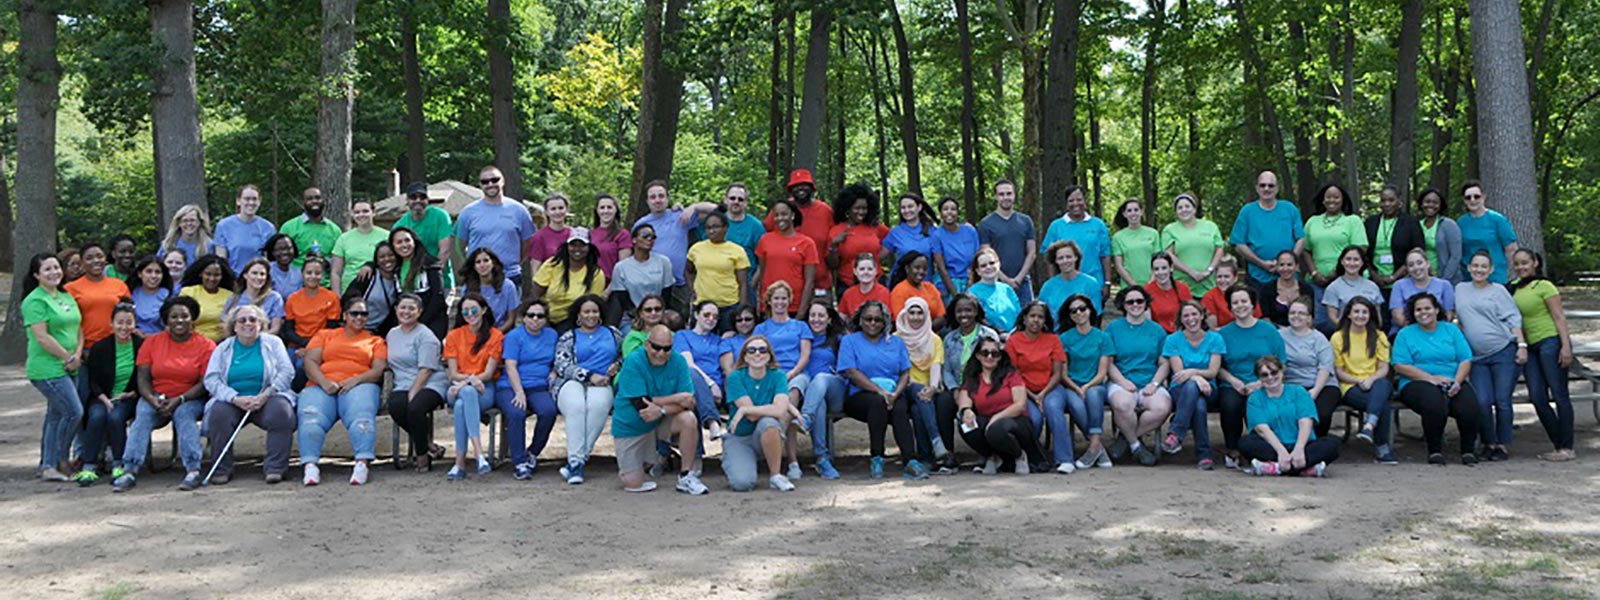 The entire Bergen's Promise staff at a company picnic